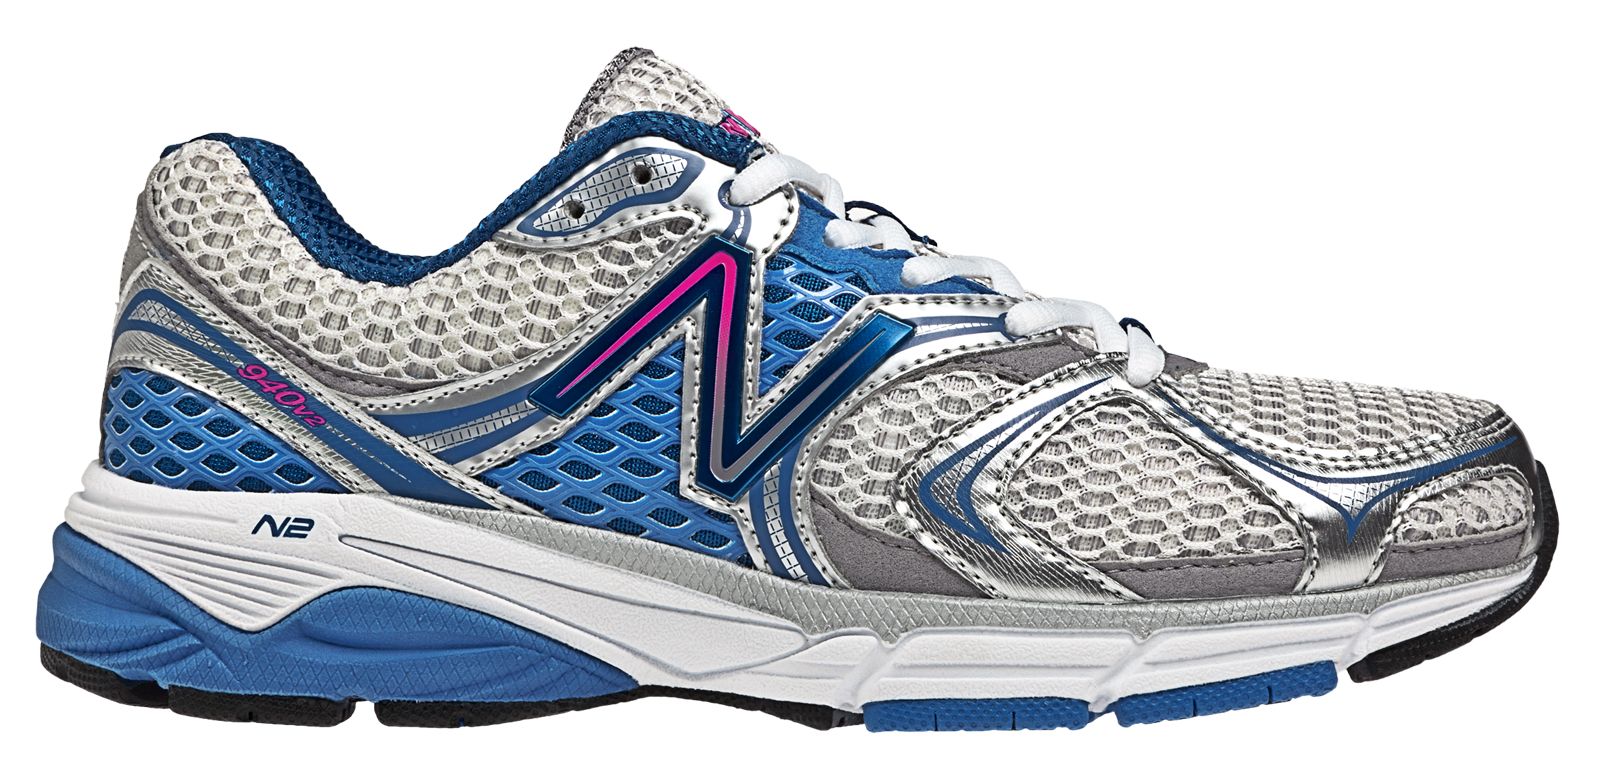 New Balance 940v2 Women’s Stability And Motion Control Shoes | Toptags